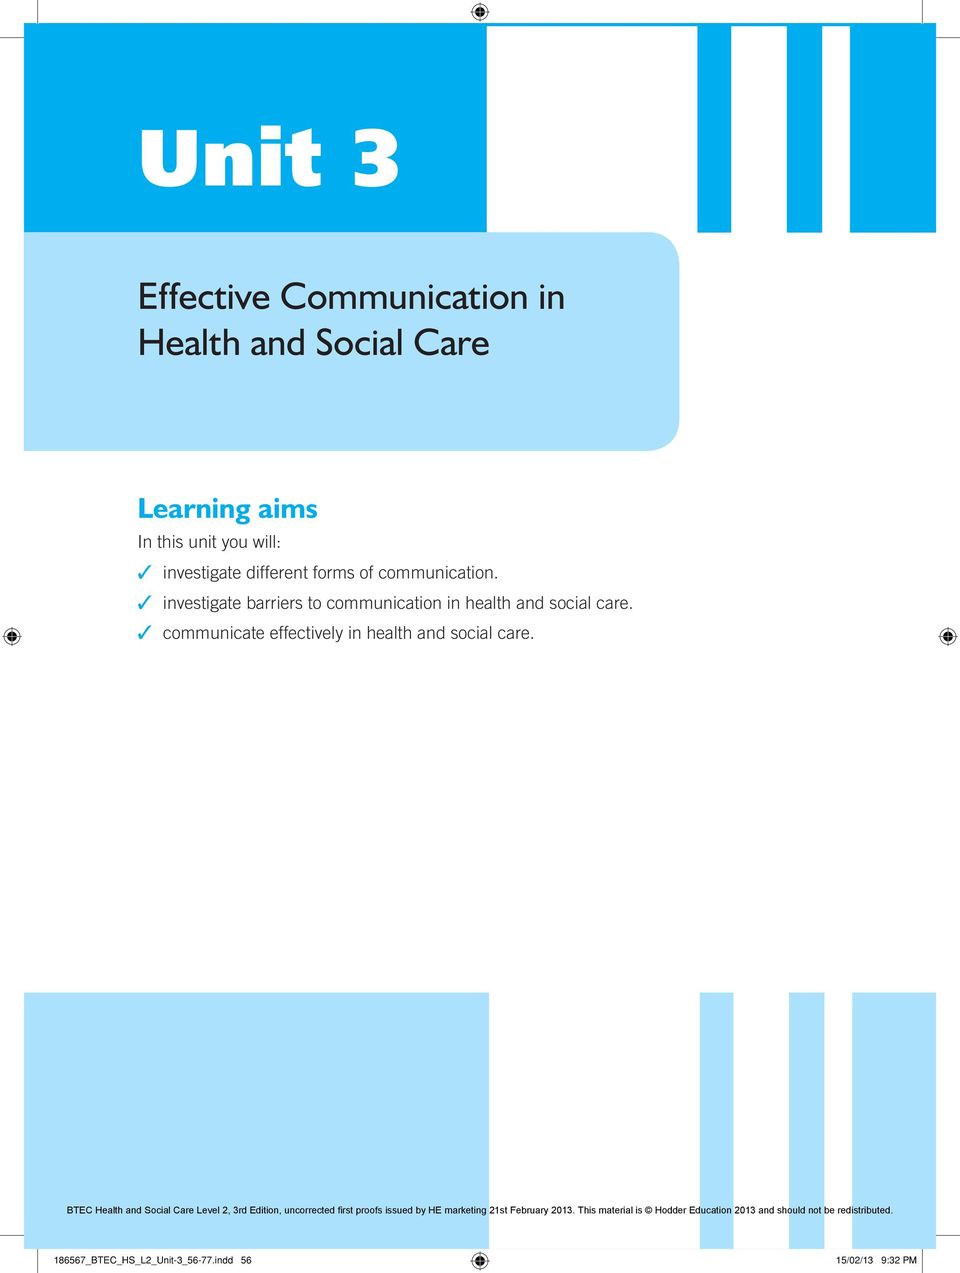 btec health and social care level 3 unit 3 p2